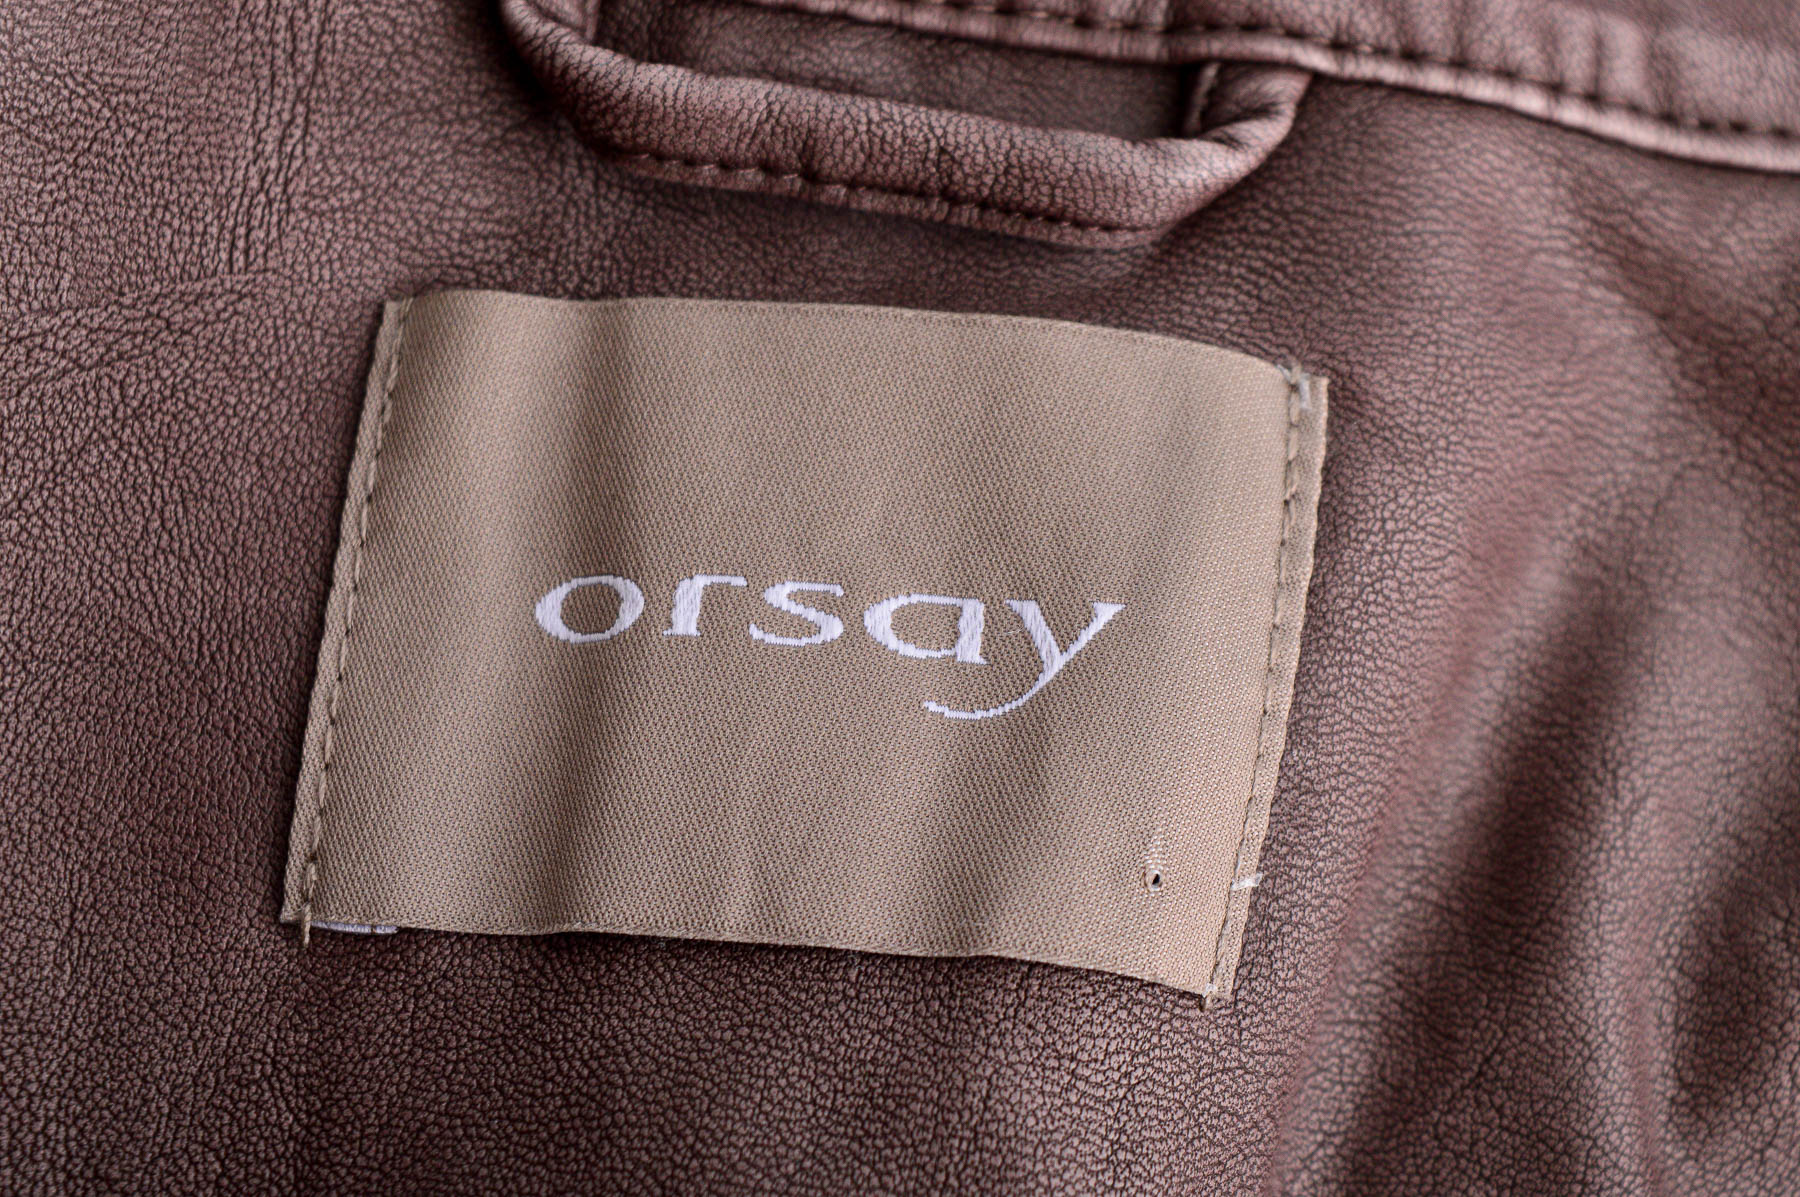 Women's leather jacket - Orsay - 2